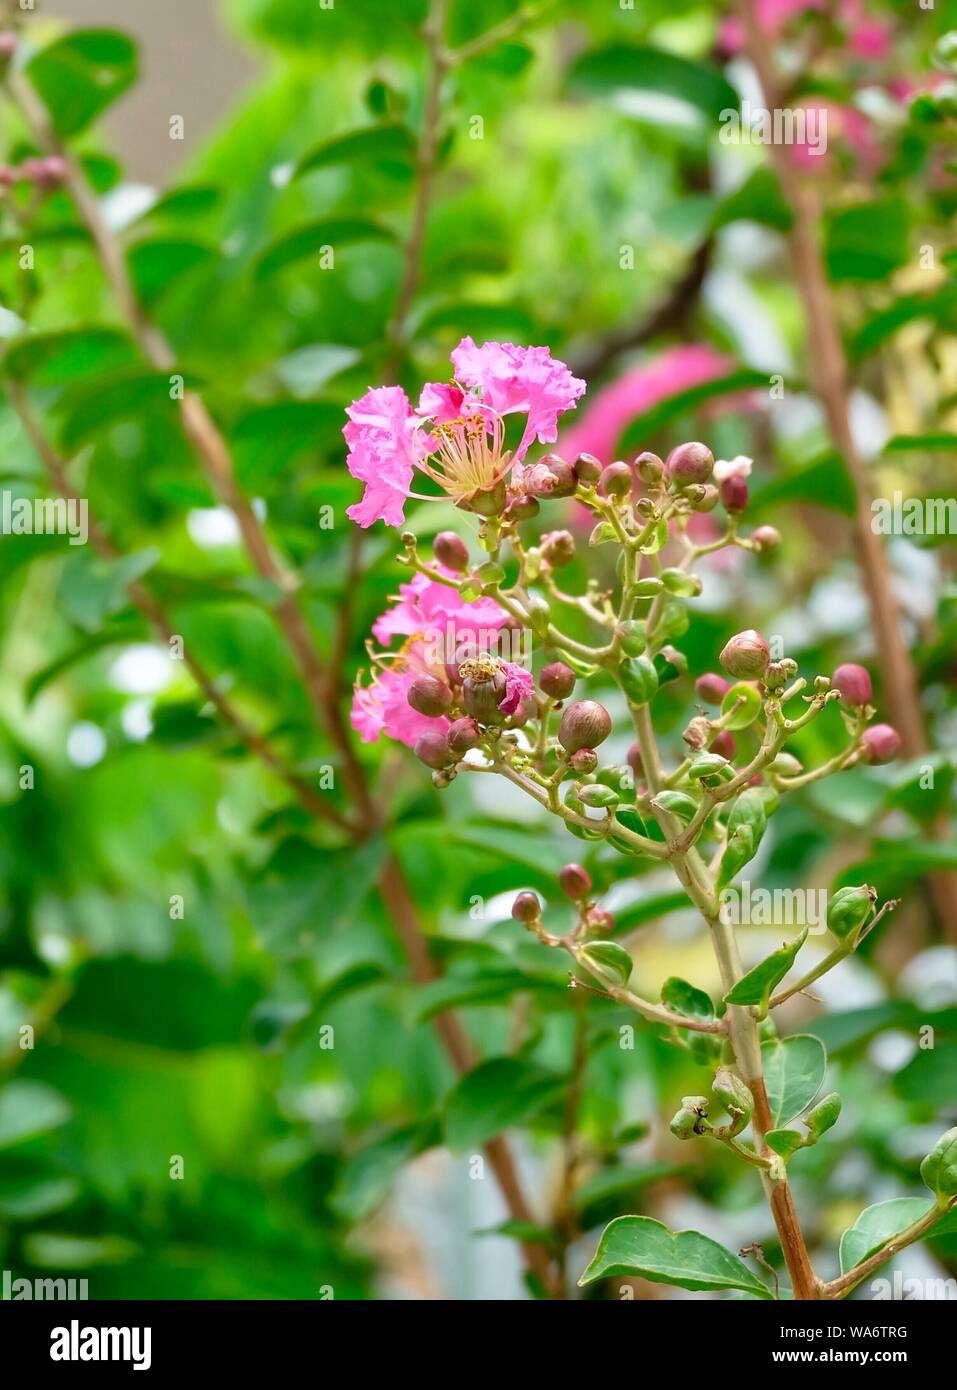 Bunch of Tropical Pink Chain of Love or Mexican Creeper Flowers Blooming on The Green Tree. Stock Photo